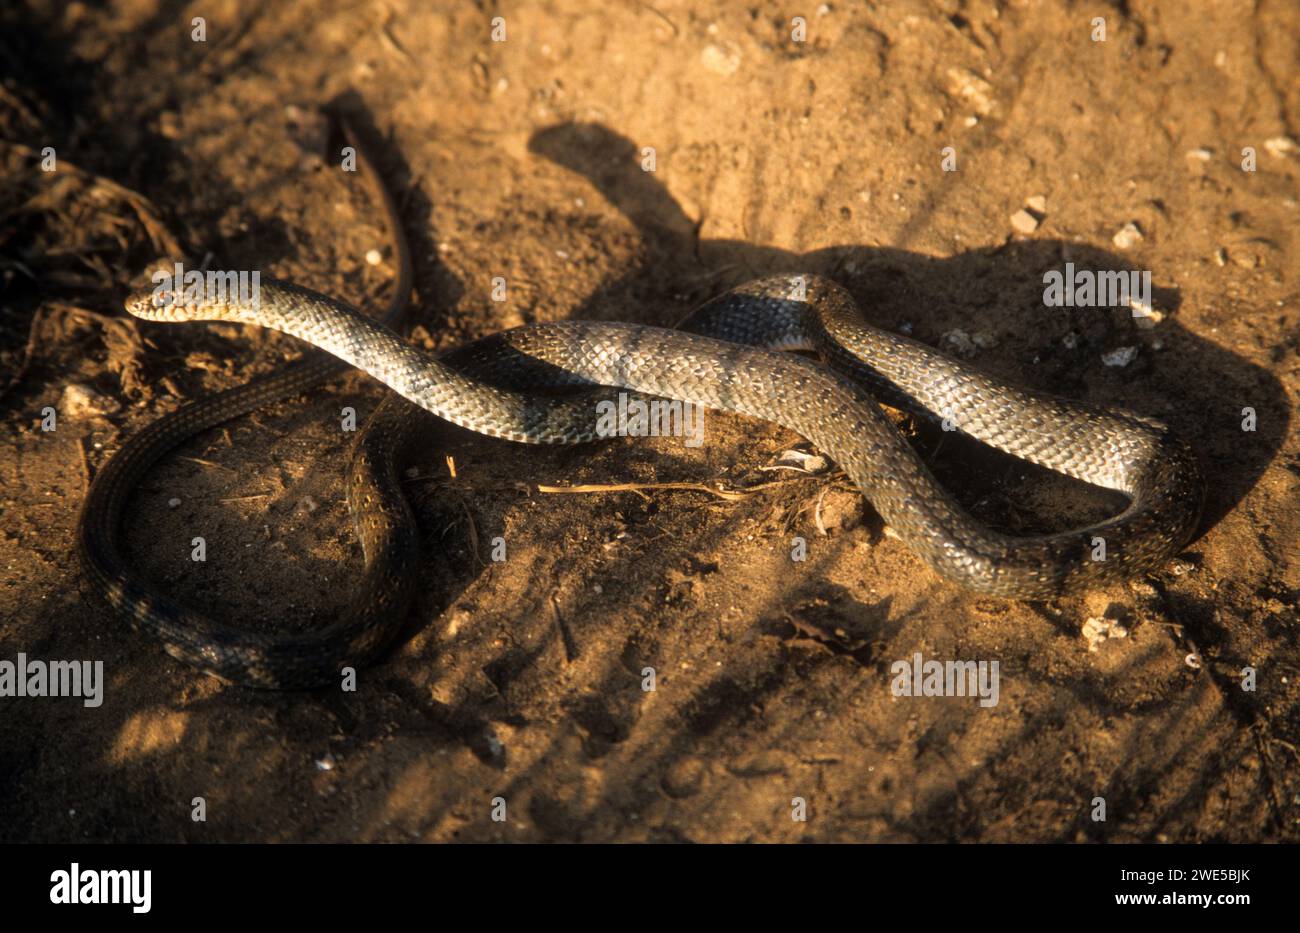 Young  Dolichophis jugularis, also known commonly as the black whipsnake and the large whip snake, Stock Photo